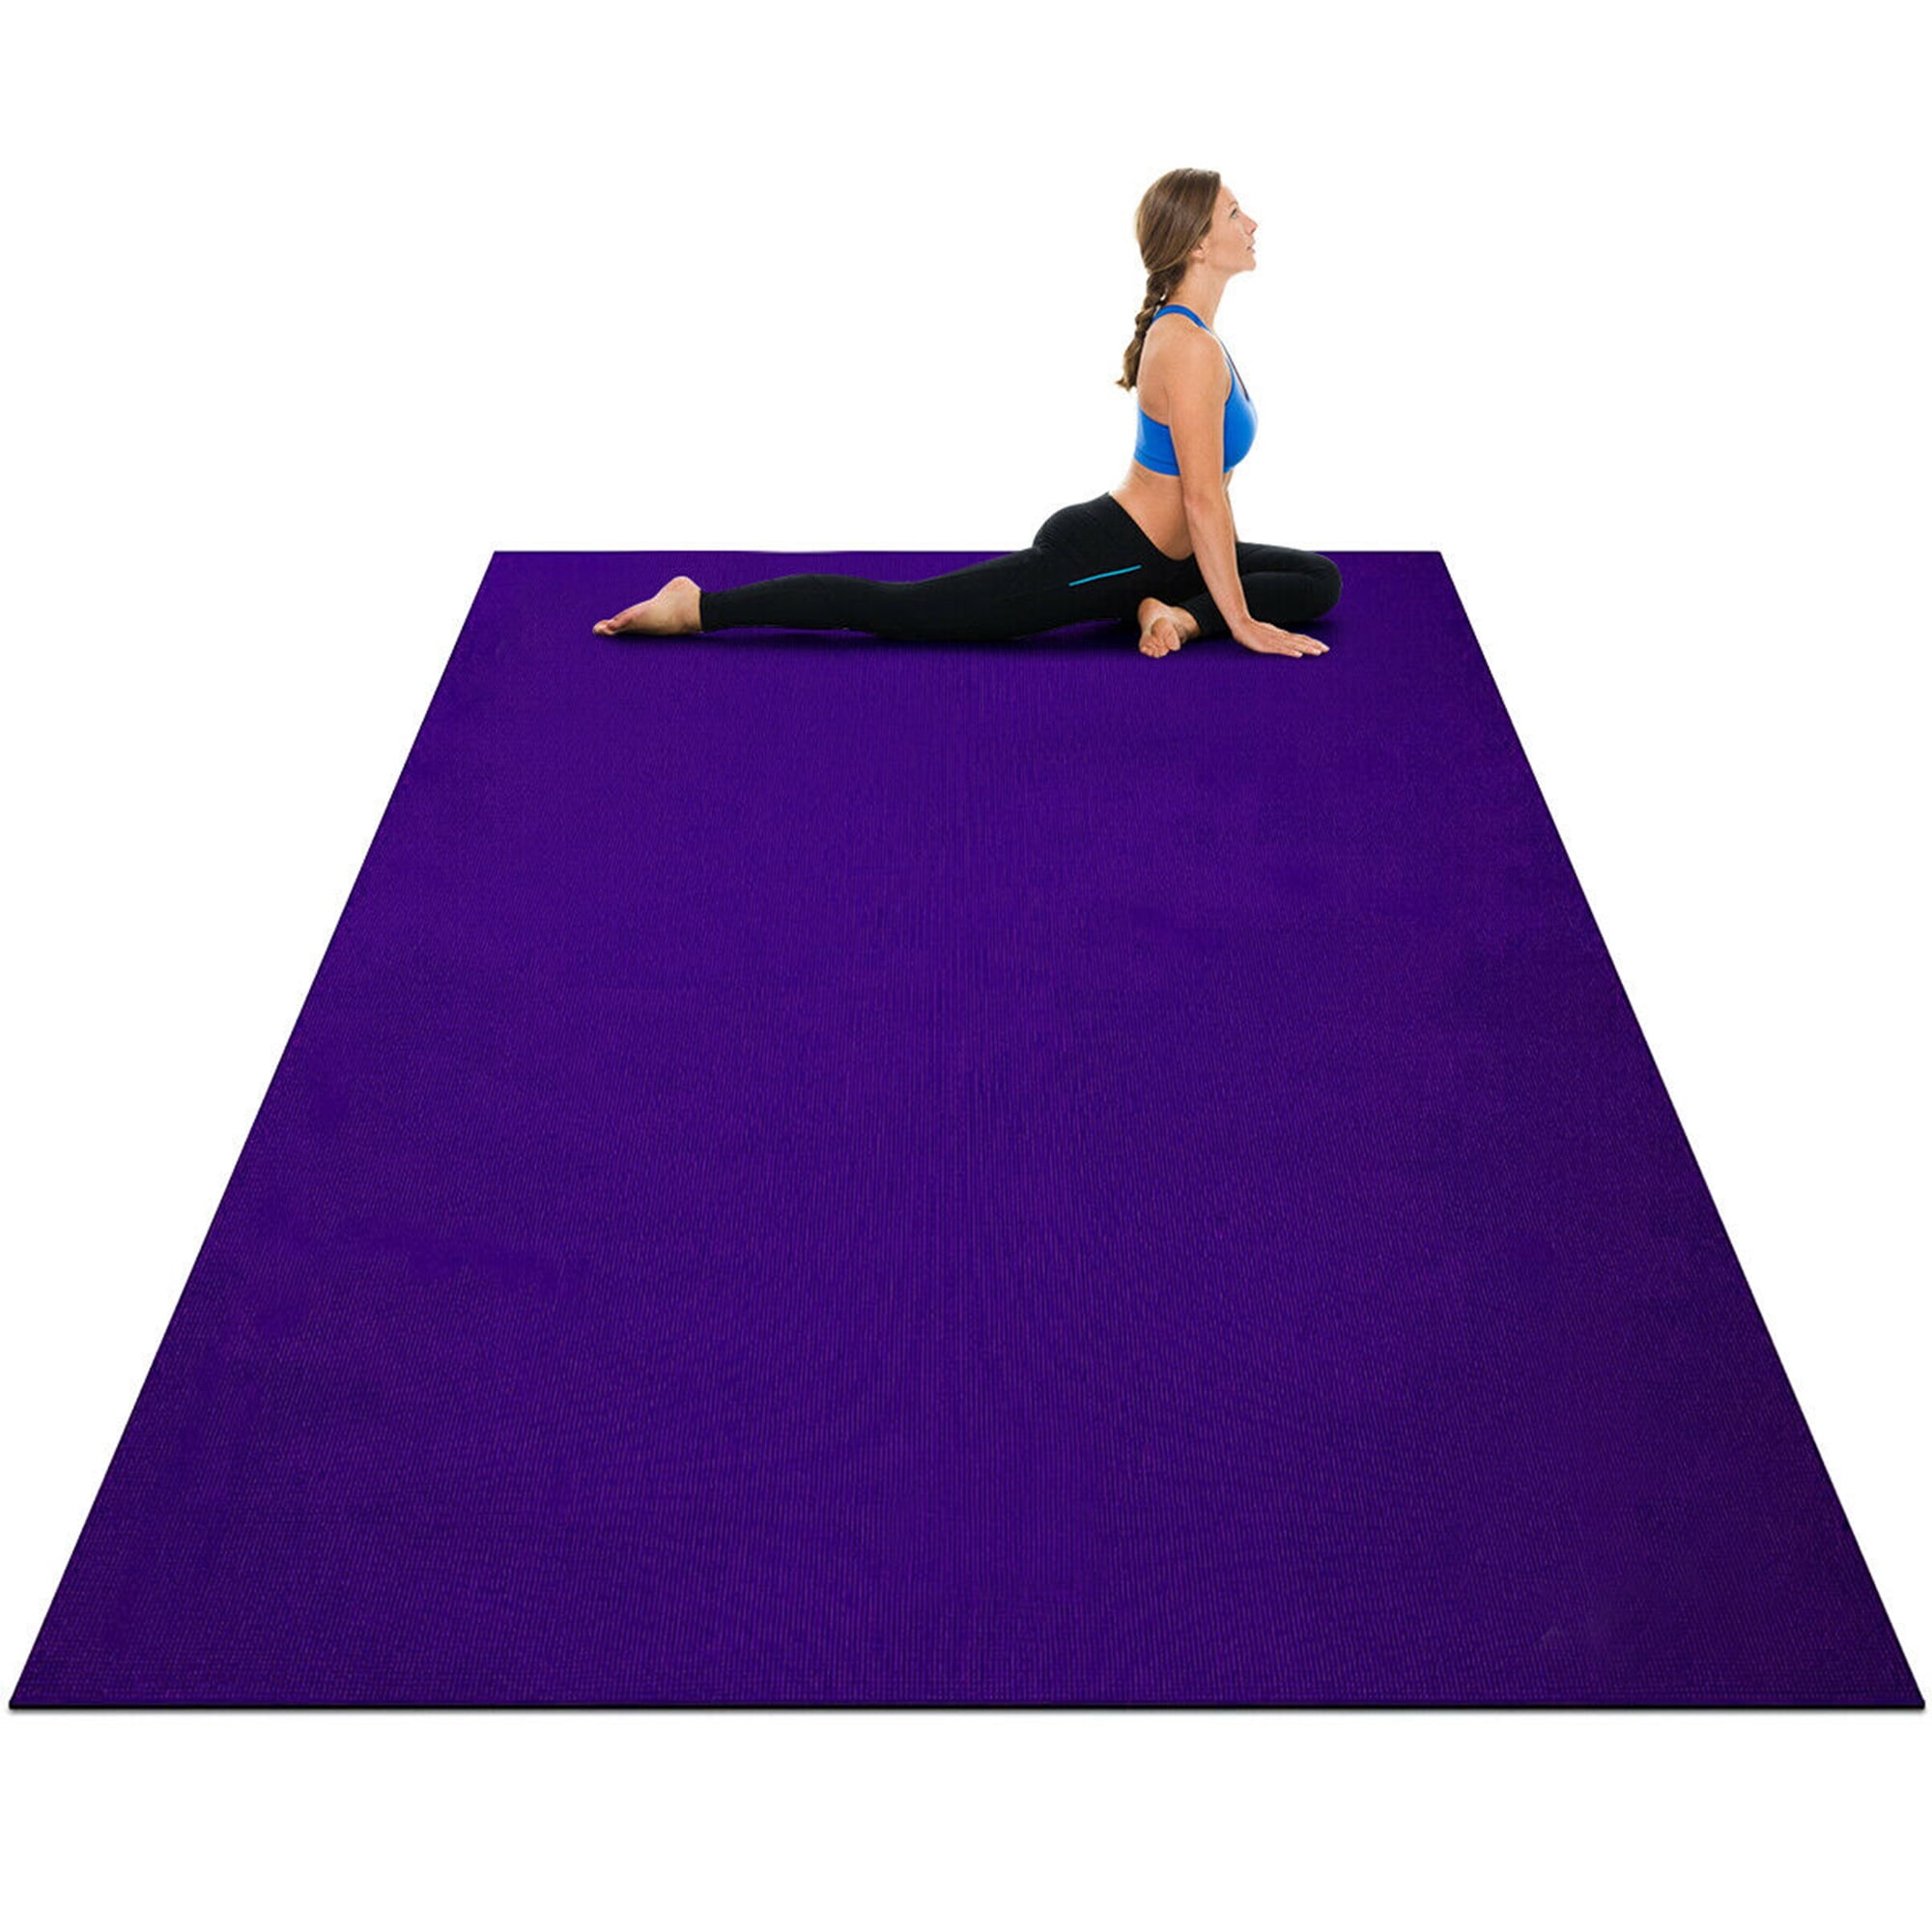 Purple Yoga Mat Thick Non-slip Pad Exercise Workout Fitness with BAG 